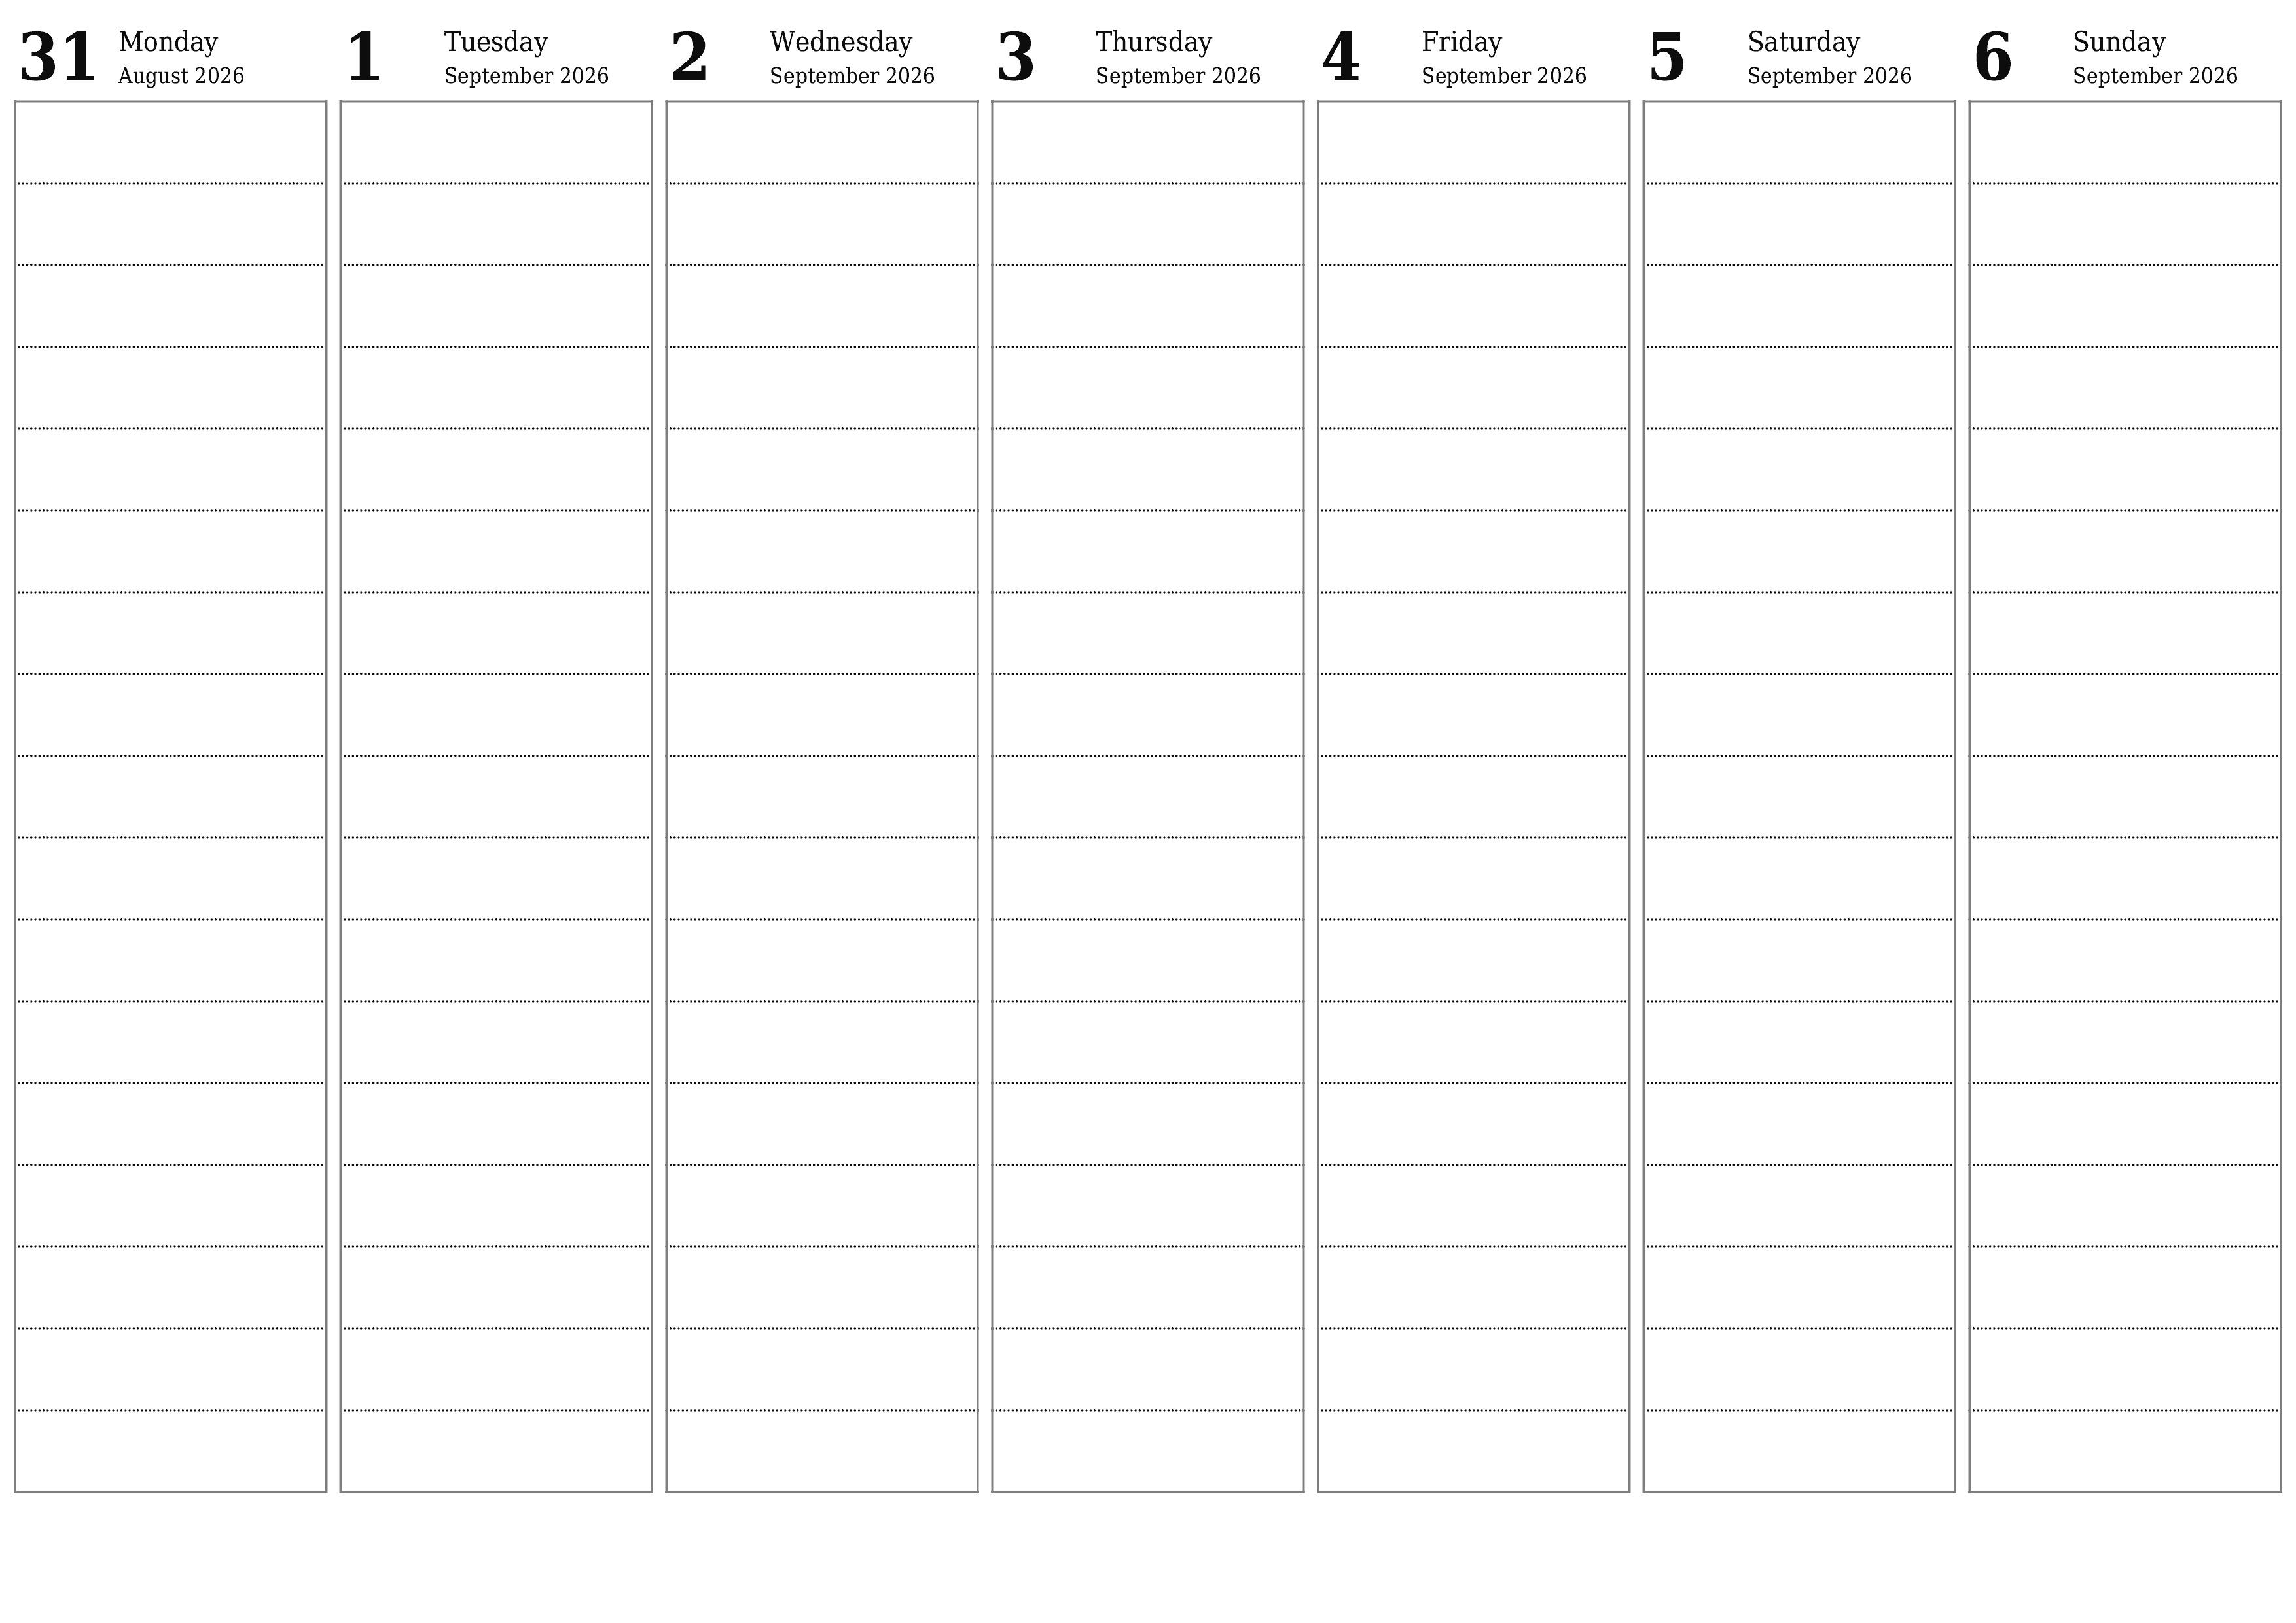 Blank weekly printable calendar and planner for week September 2026 with notes, save and print to PDF PNG English